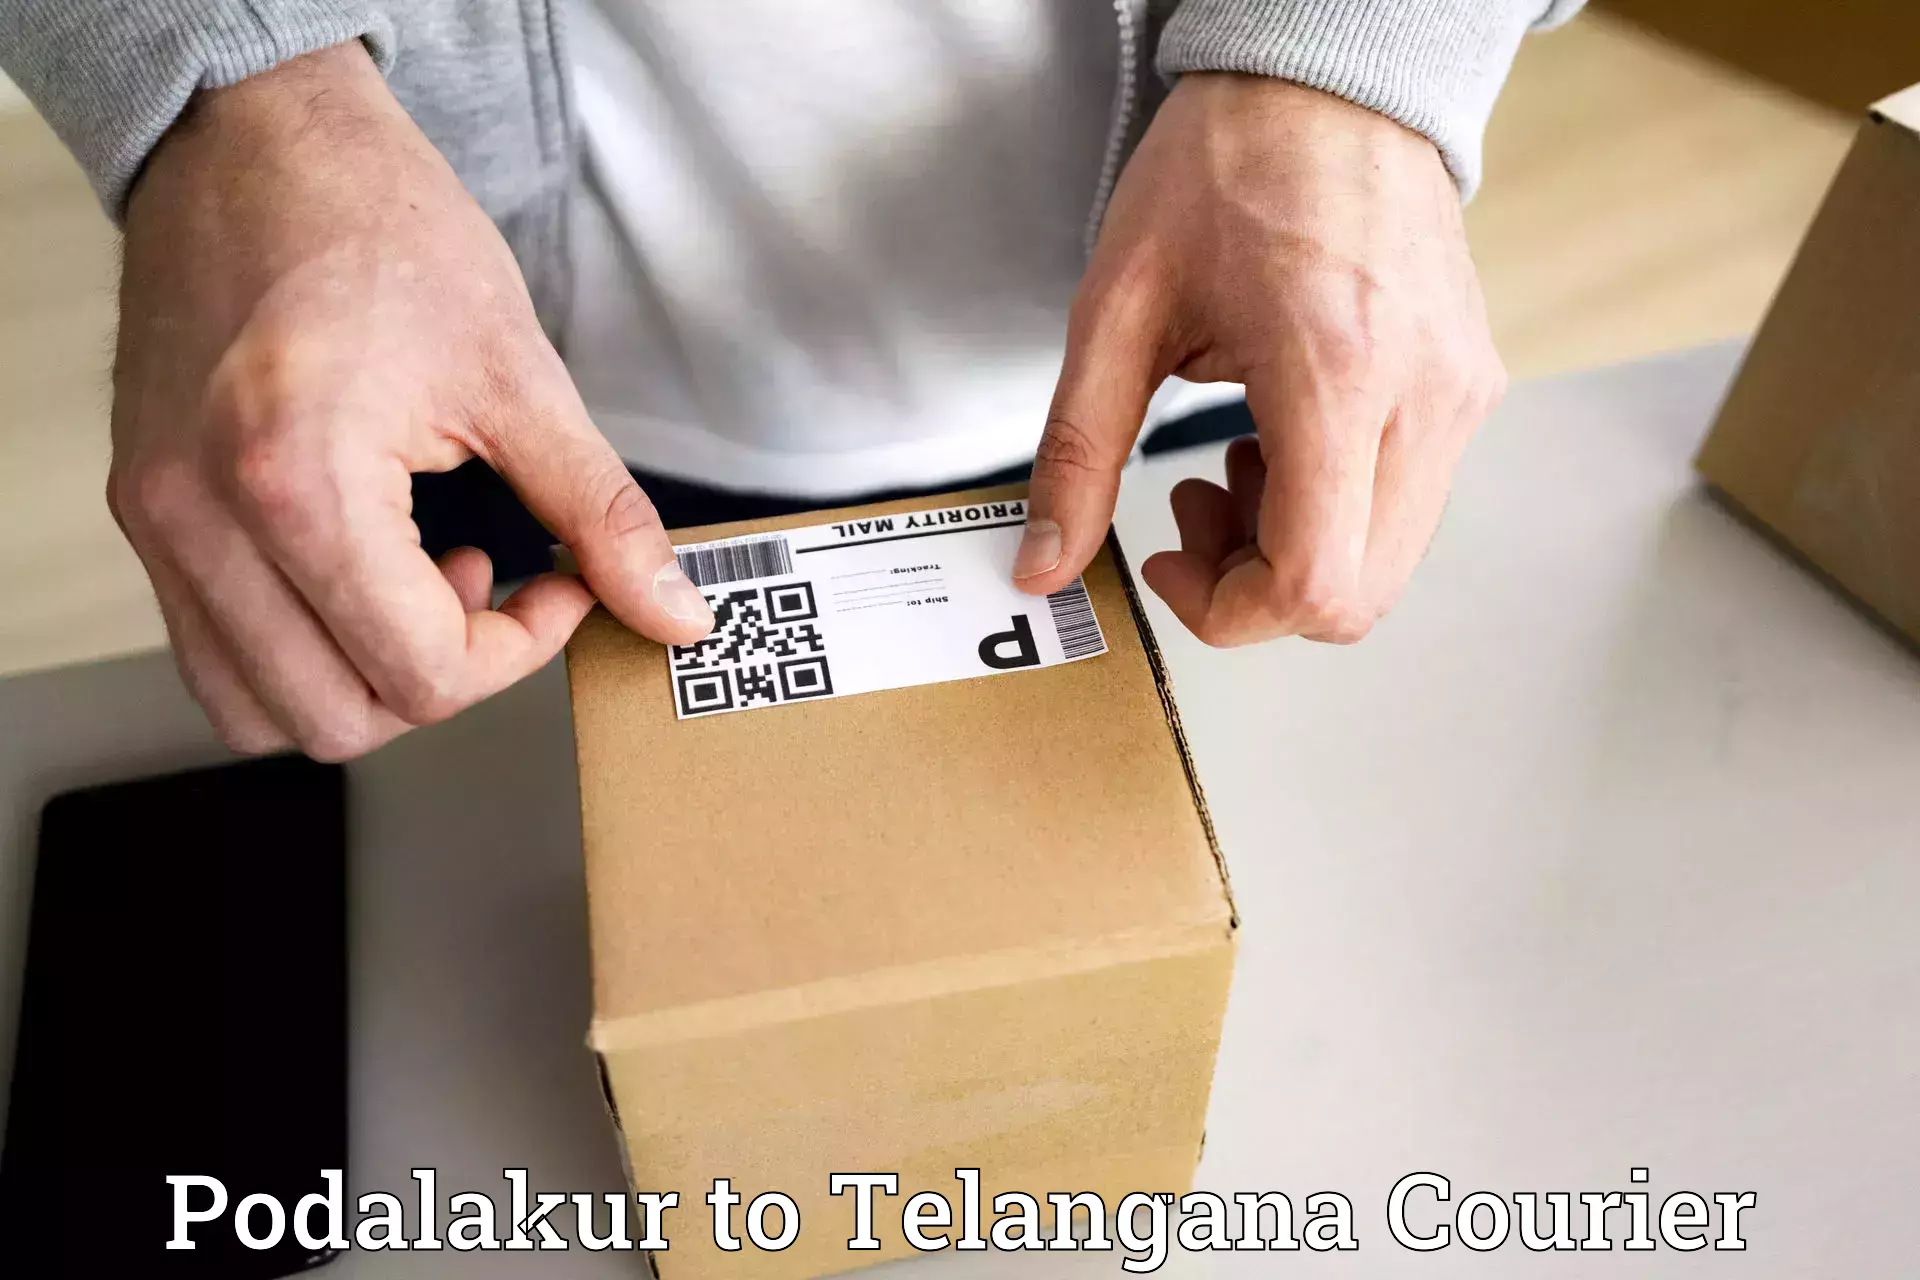 Professional parcel services in Podalakur to Jangaon